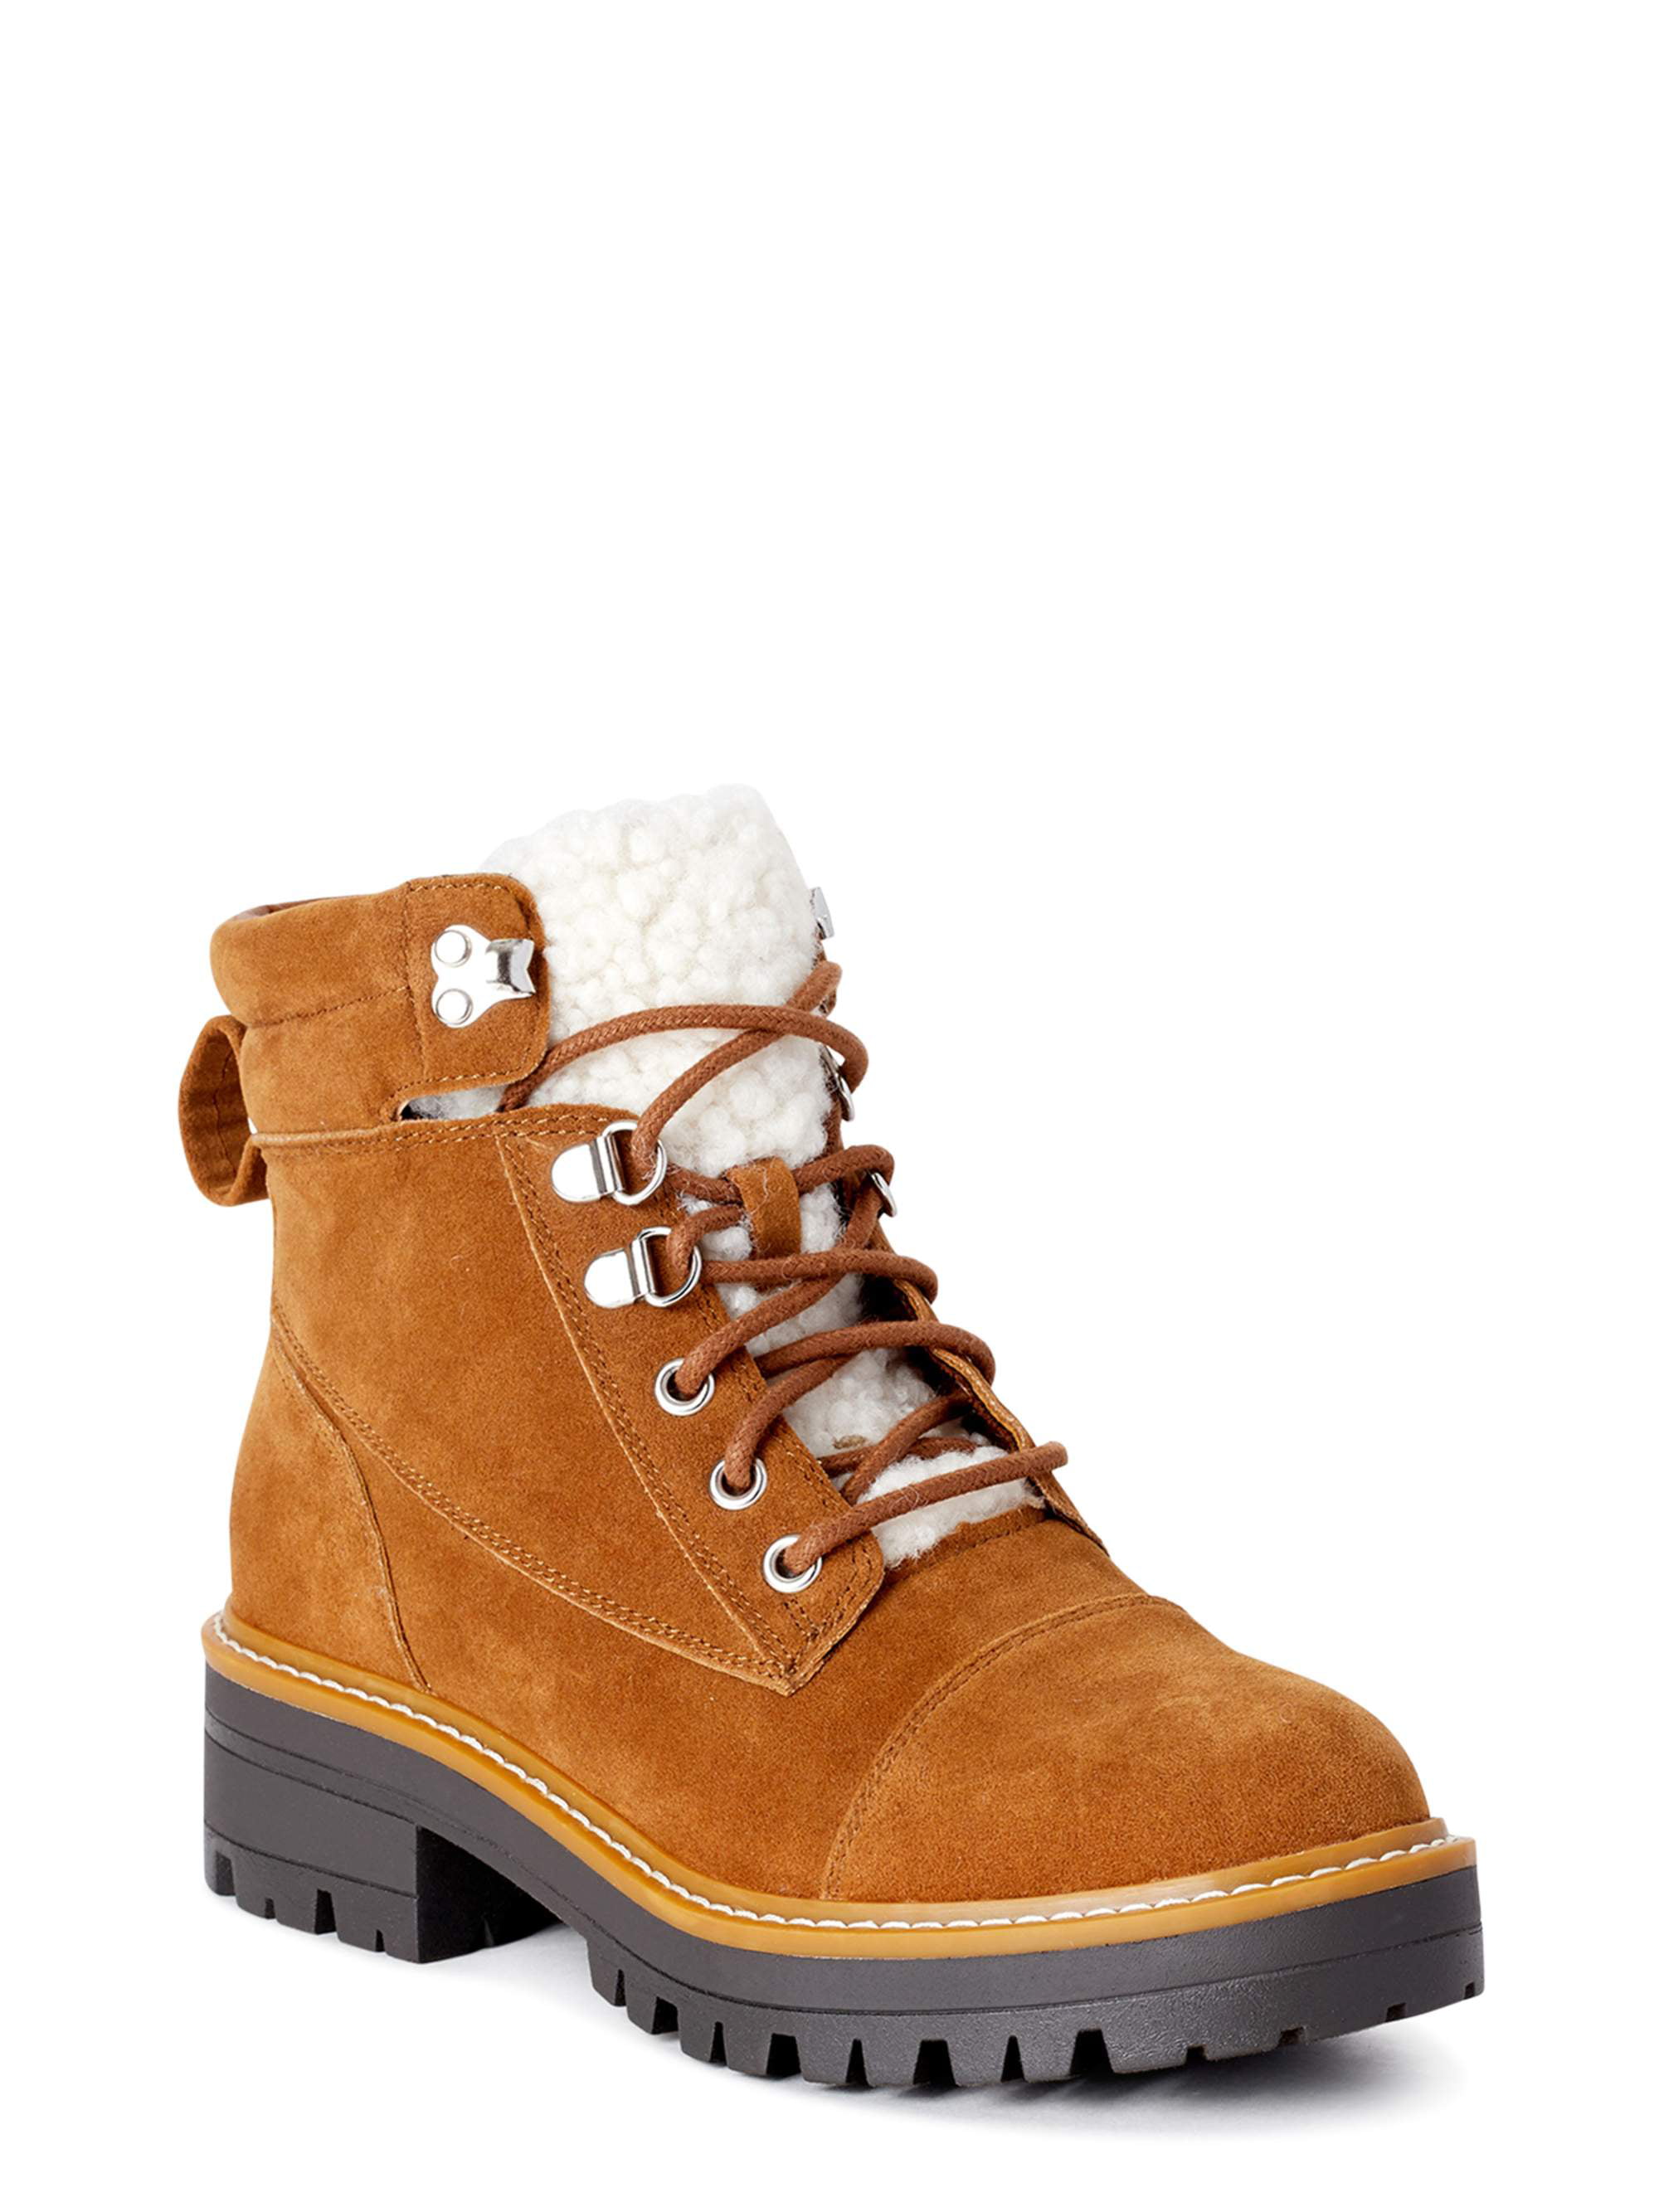 Hiker Boots, Wide Width Available 